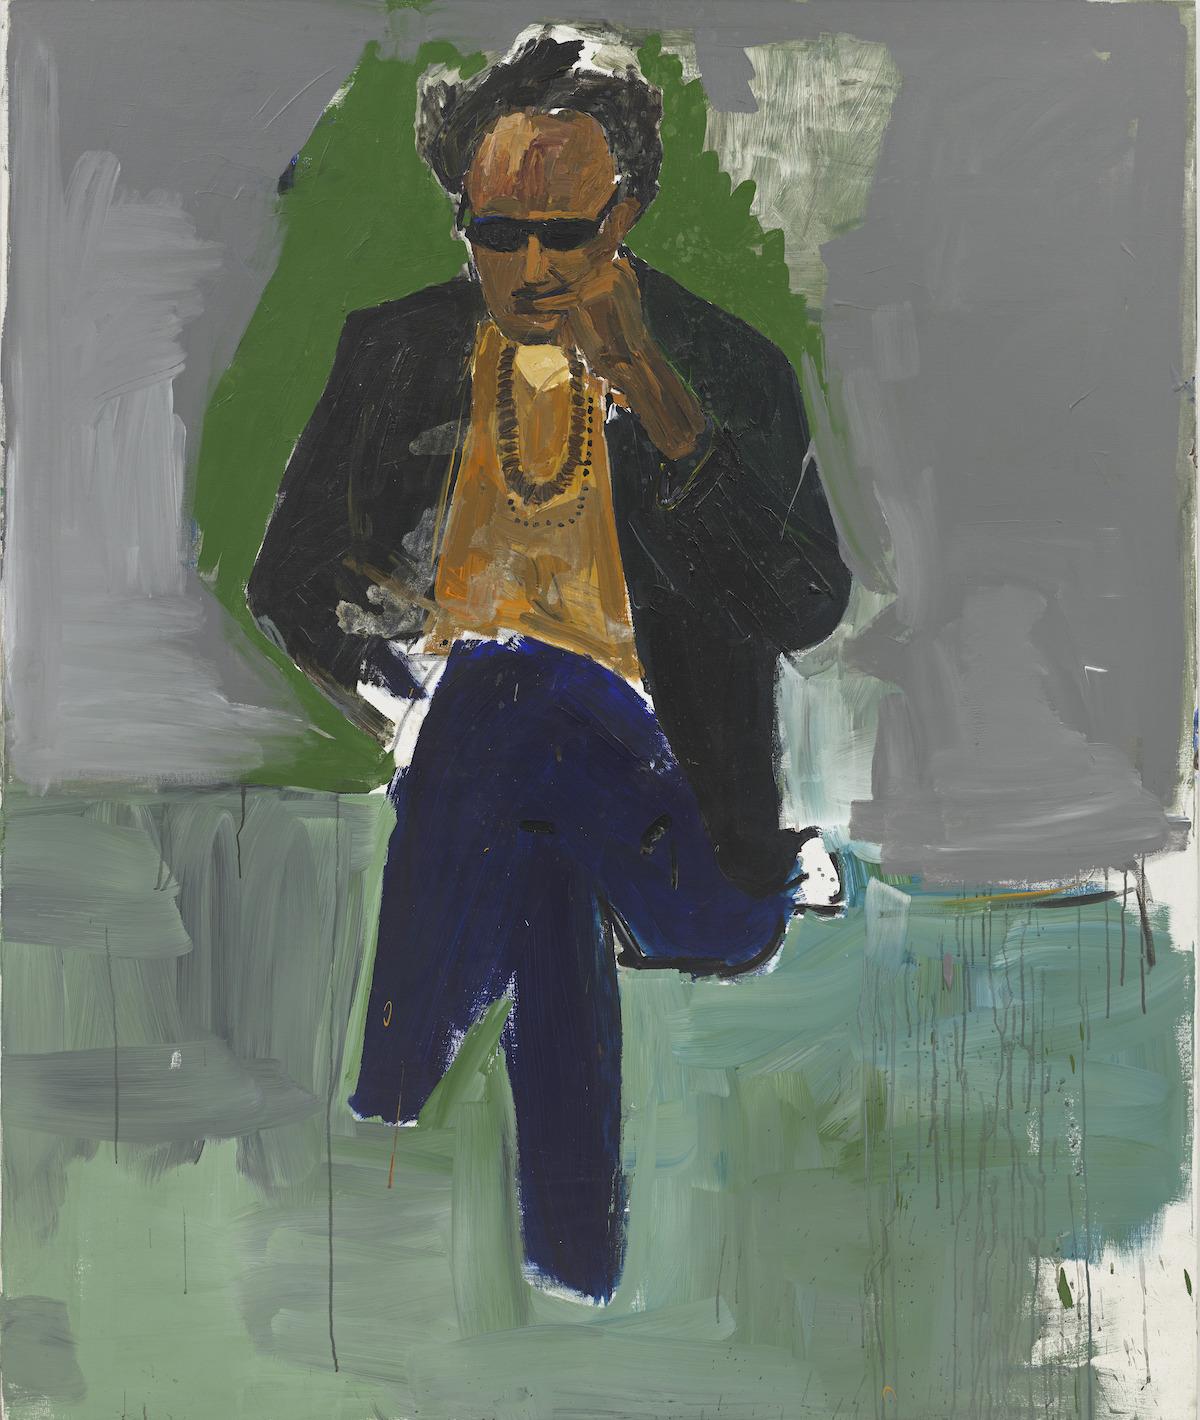 Henry Taylor, Portrait of Steve Cannon, 2013. Acrylic on canvas, 70 × 47 in. (177.8 × 119.4 cm). Hudgins Family Collection. © Henry Taylor. Courtesy the artist and Hauser & Wirth. Photograph by Joshua White